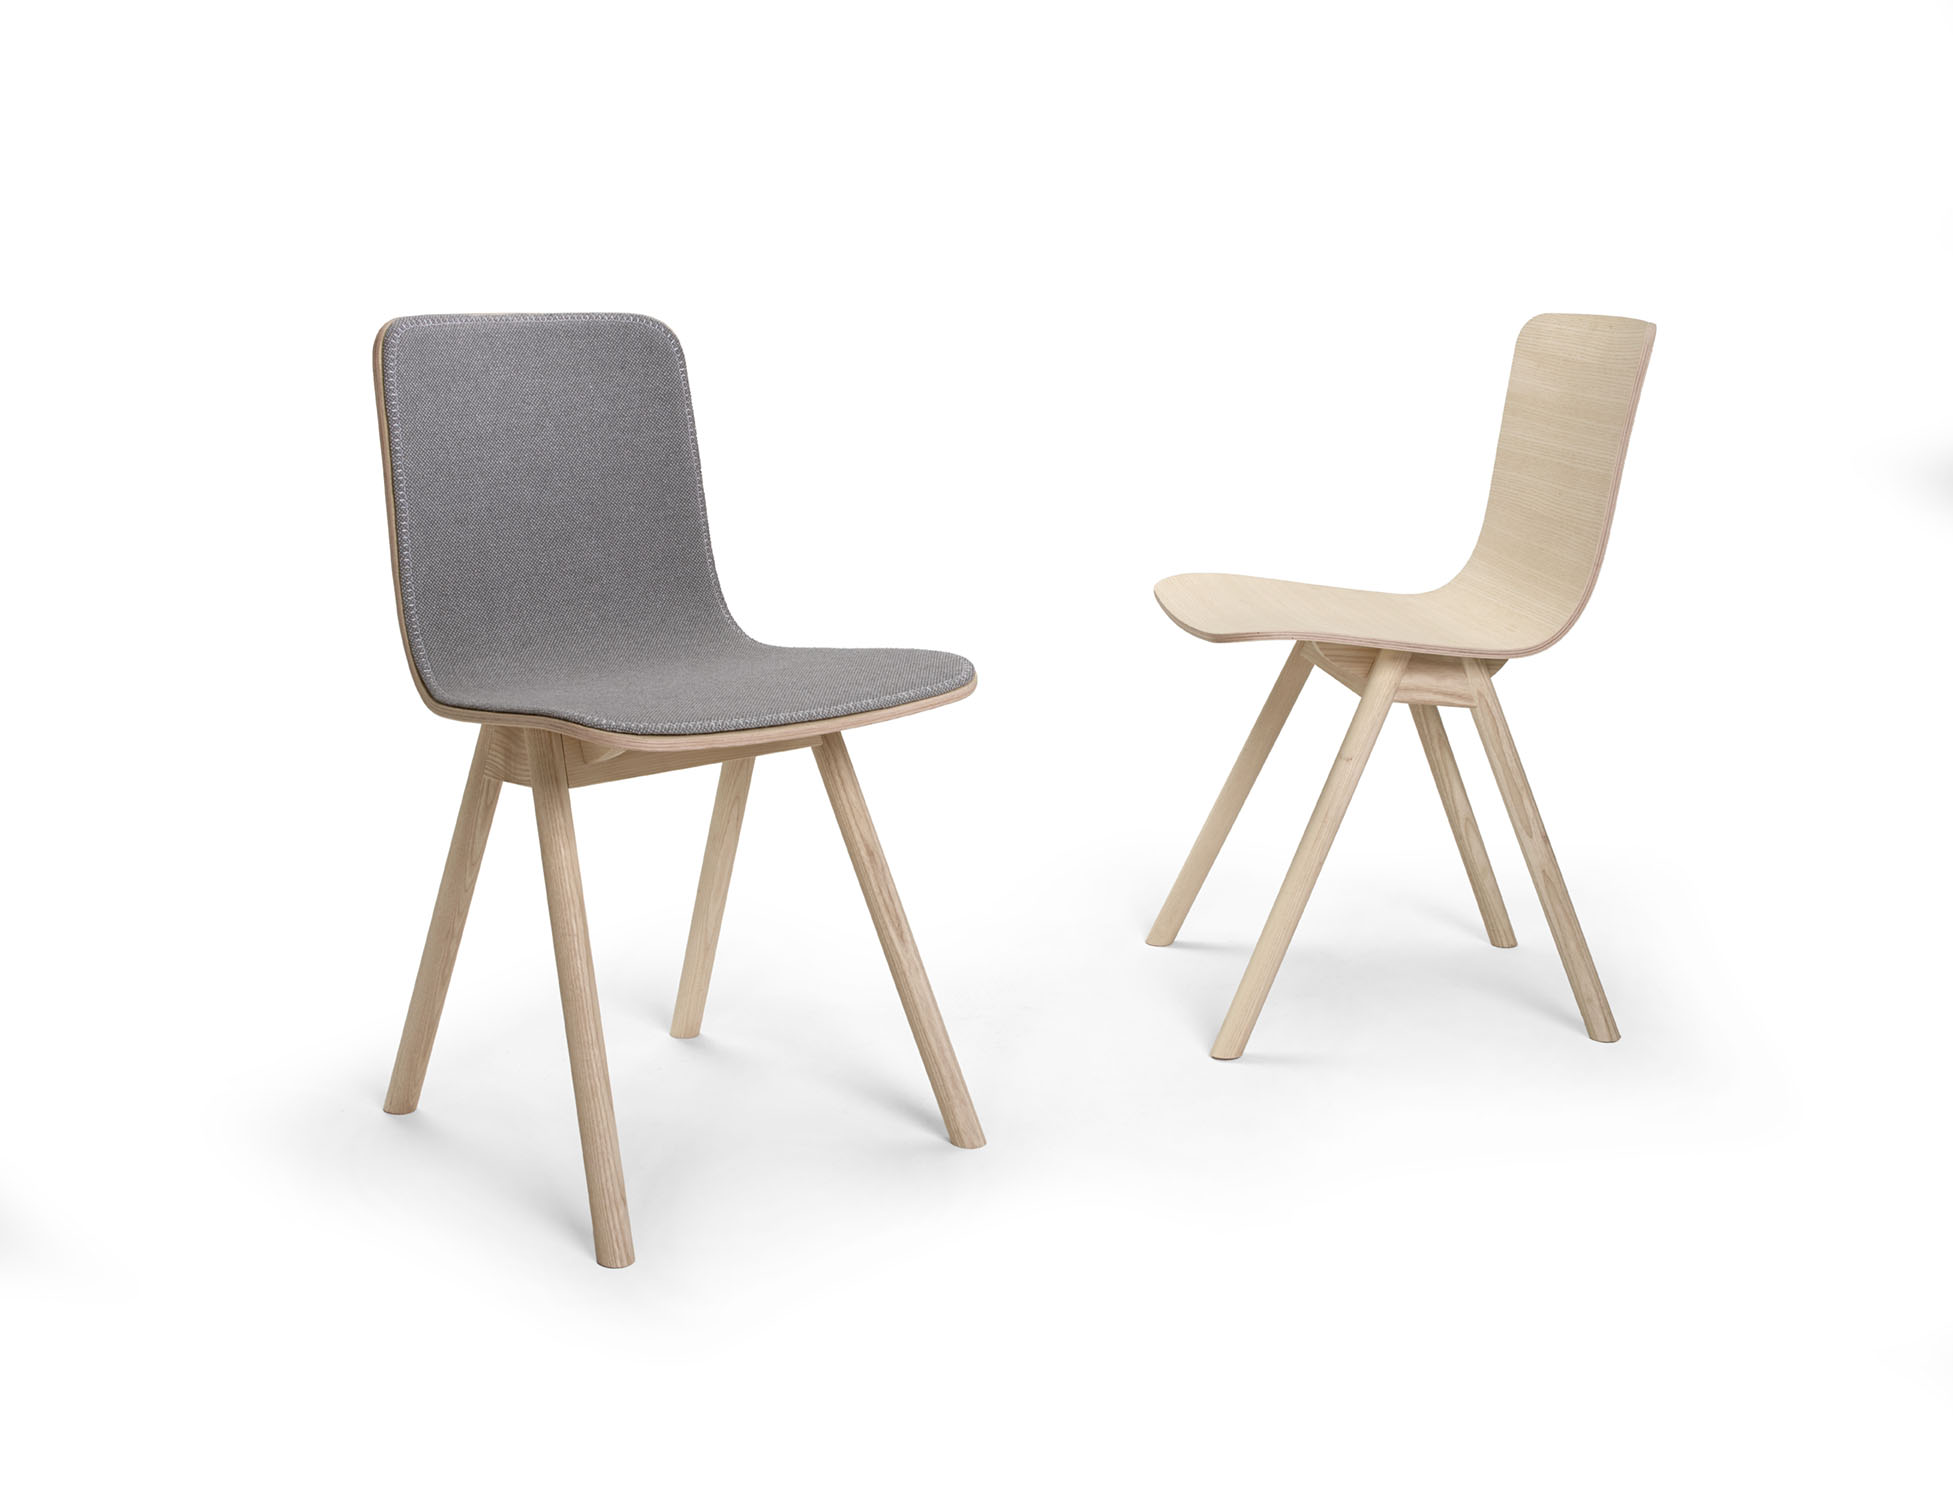 Kali chair by Offecct and Jasper Morrison